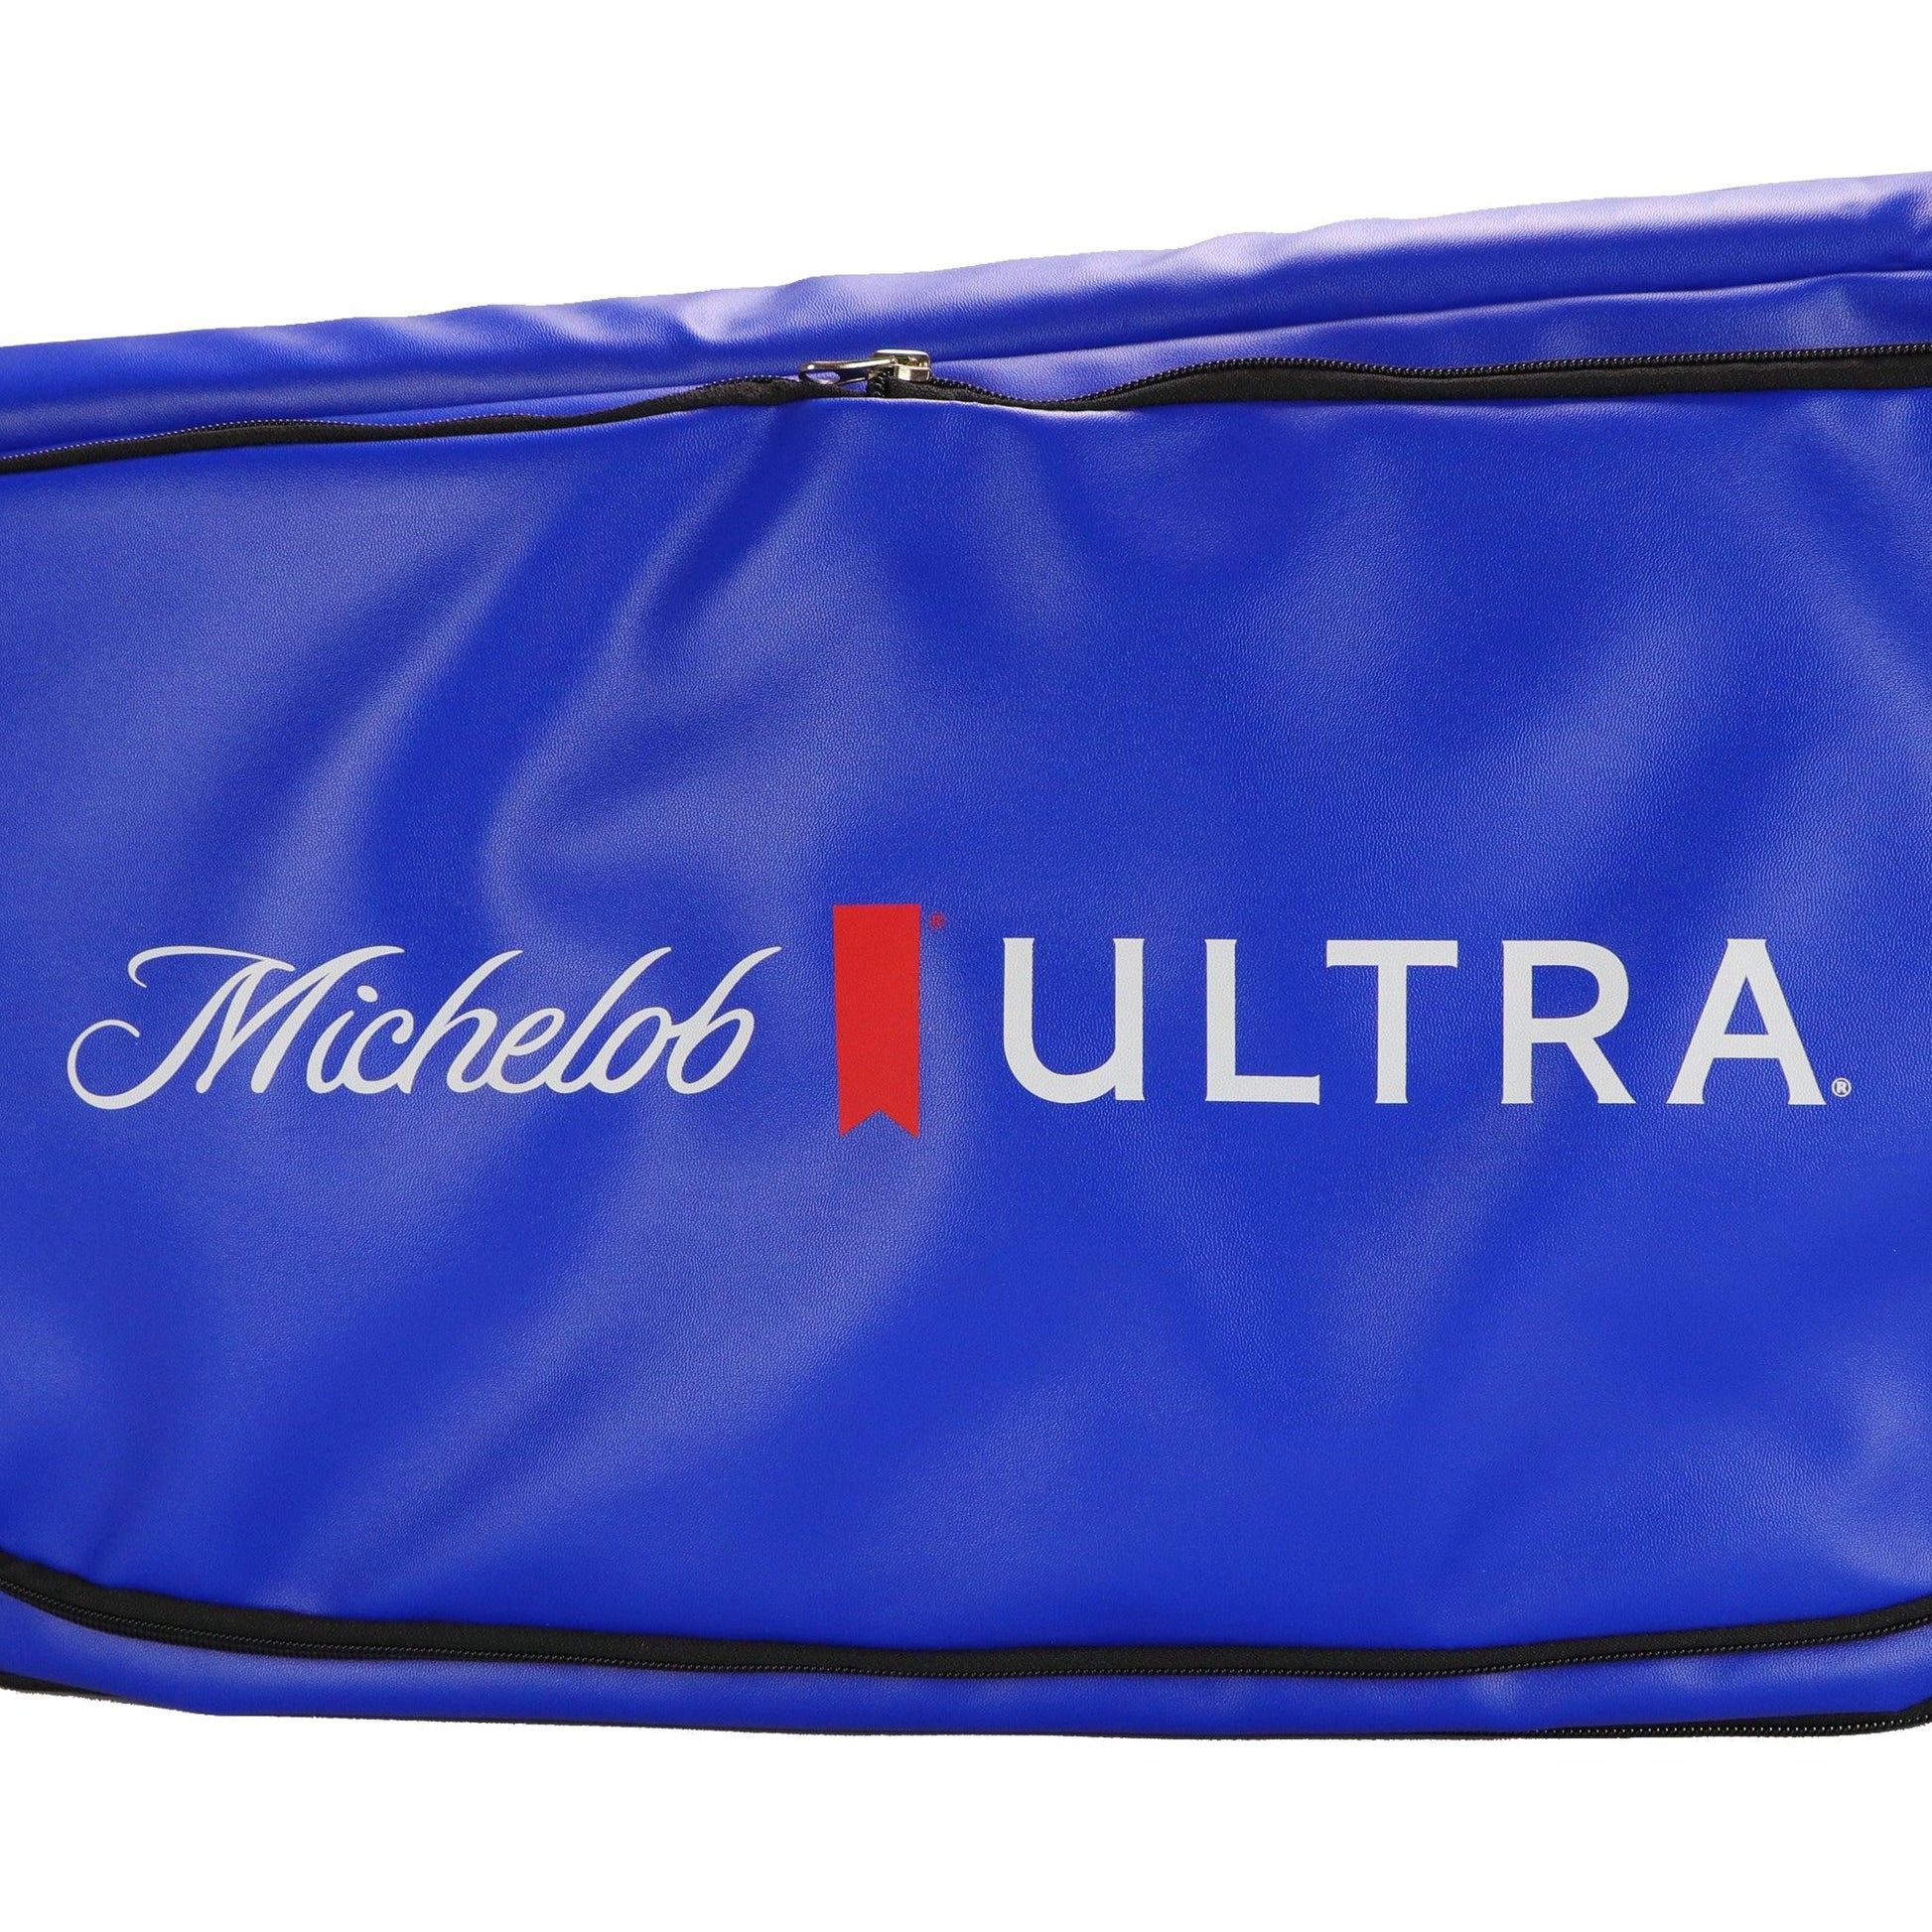 detail of michelob ultra logo on bag 